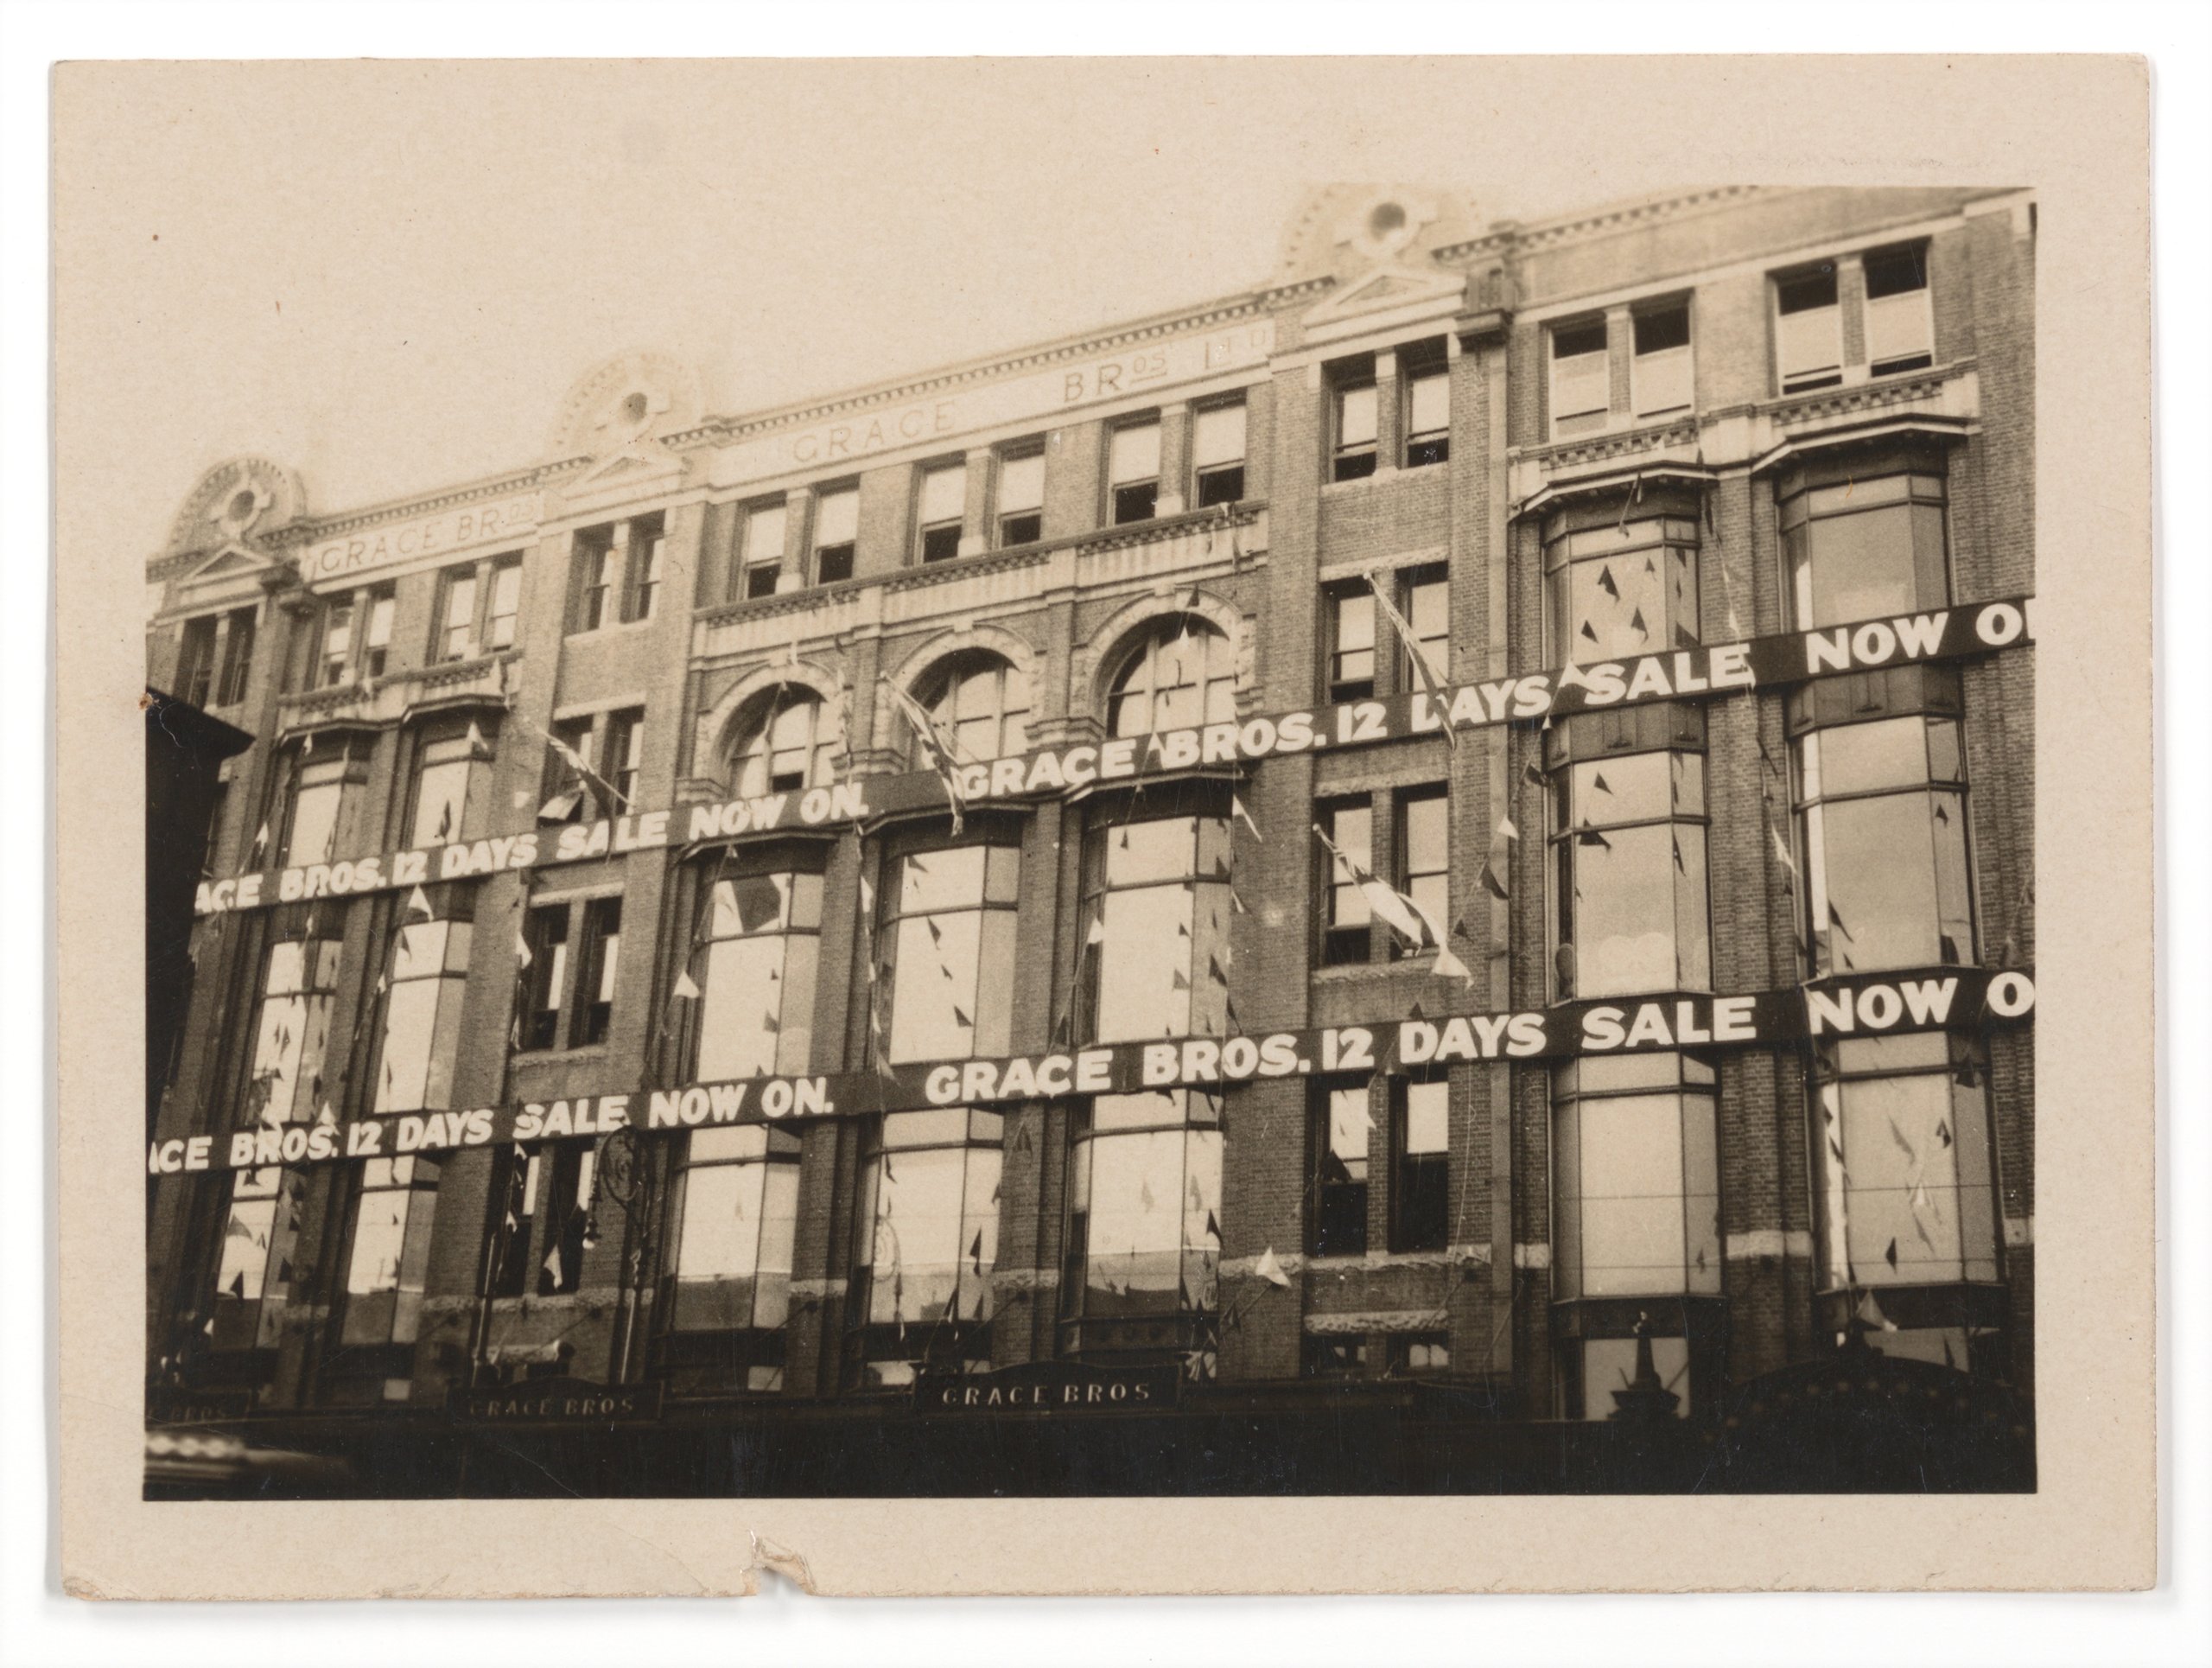 Photograph of advertising signs for Grace Bros 12 Days Sale